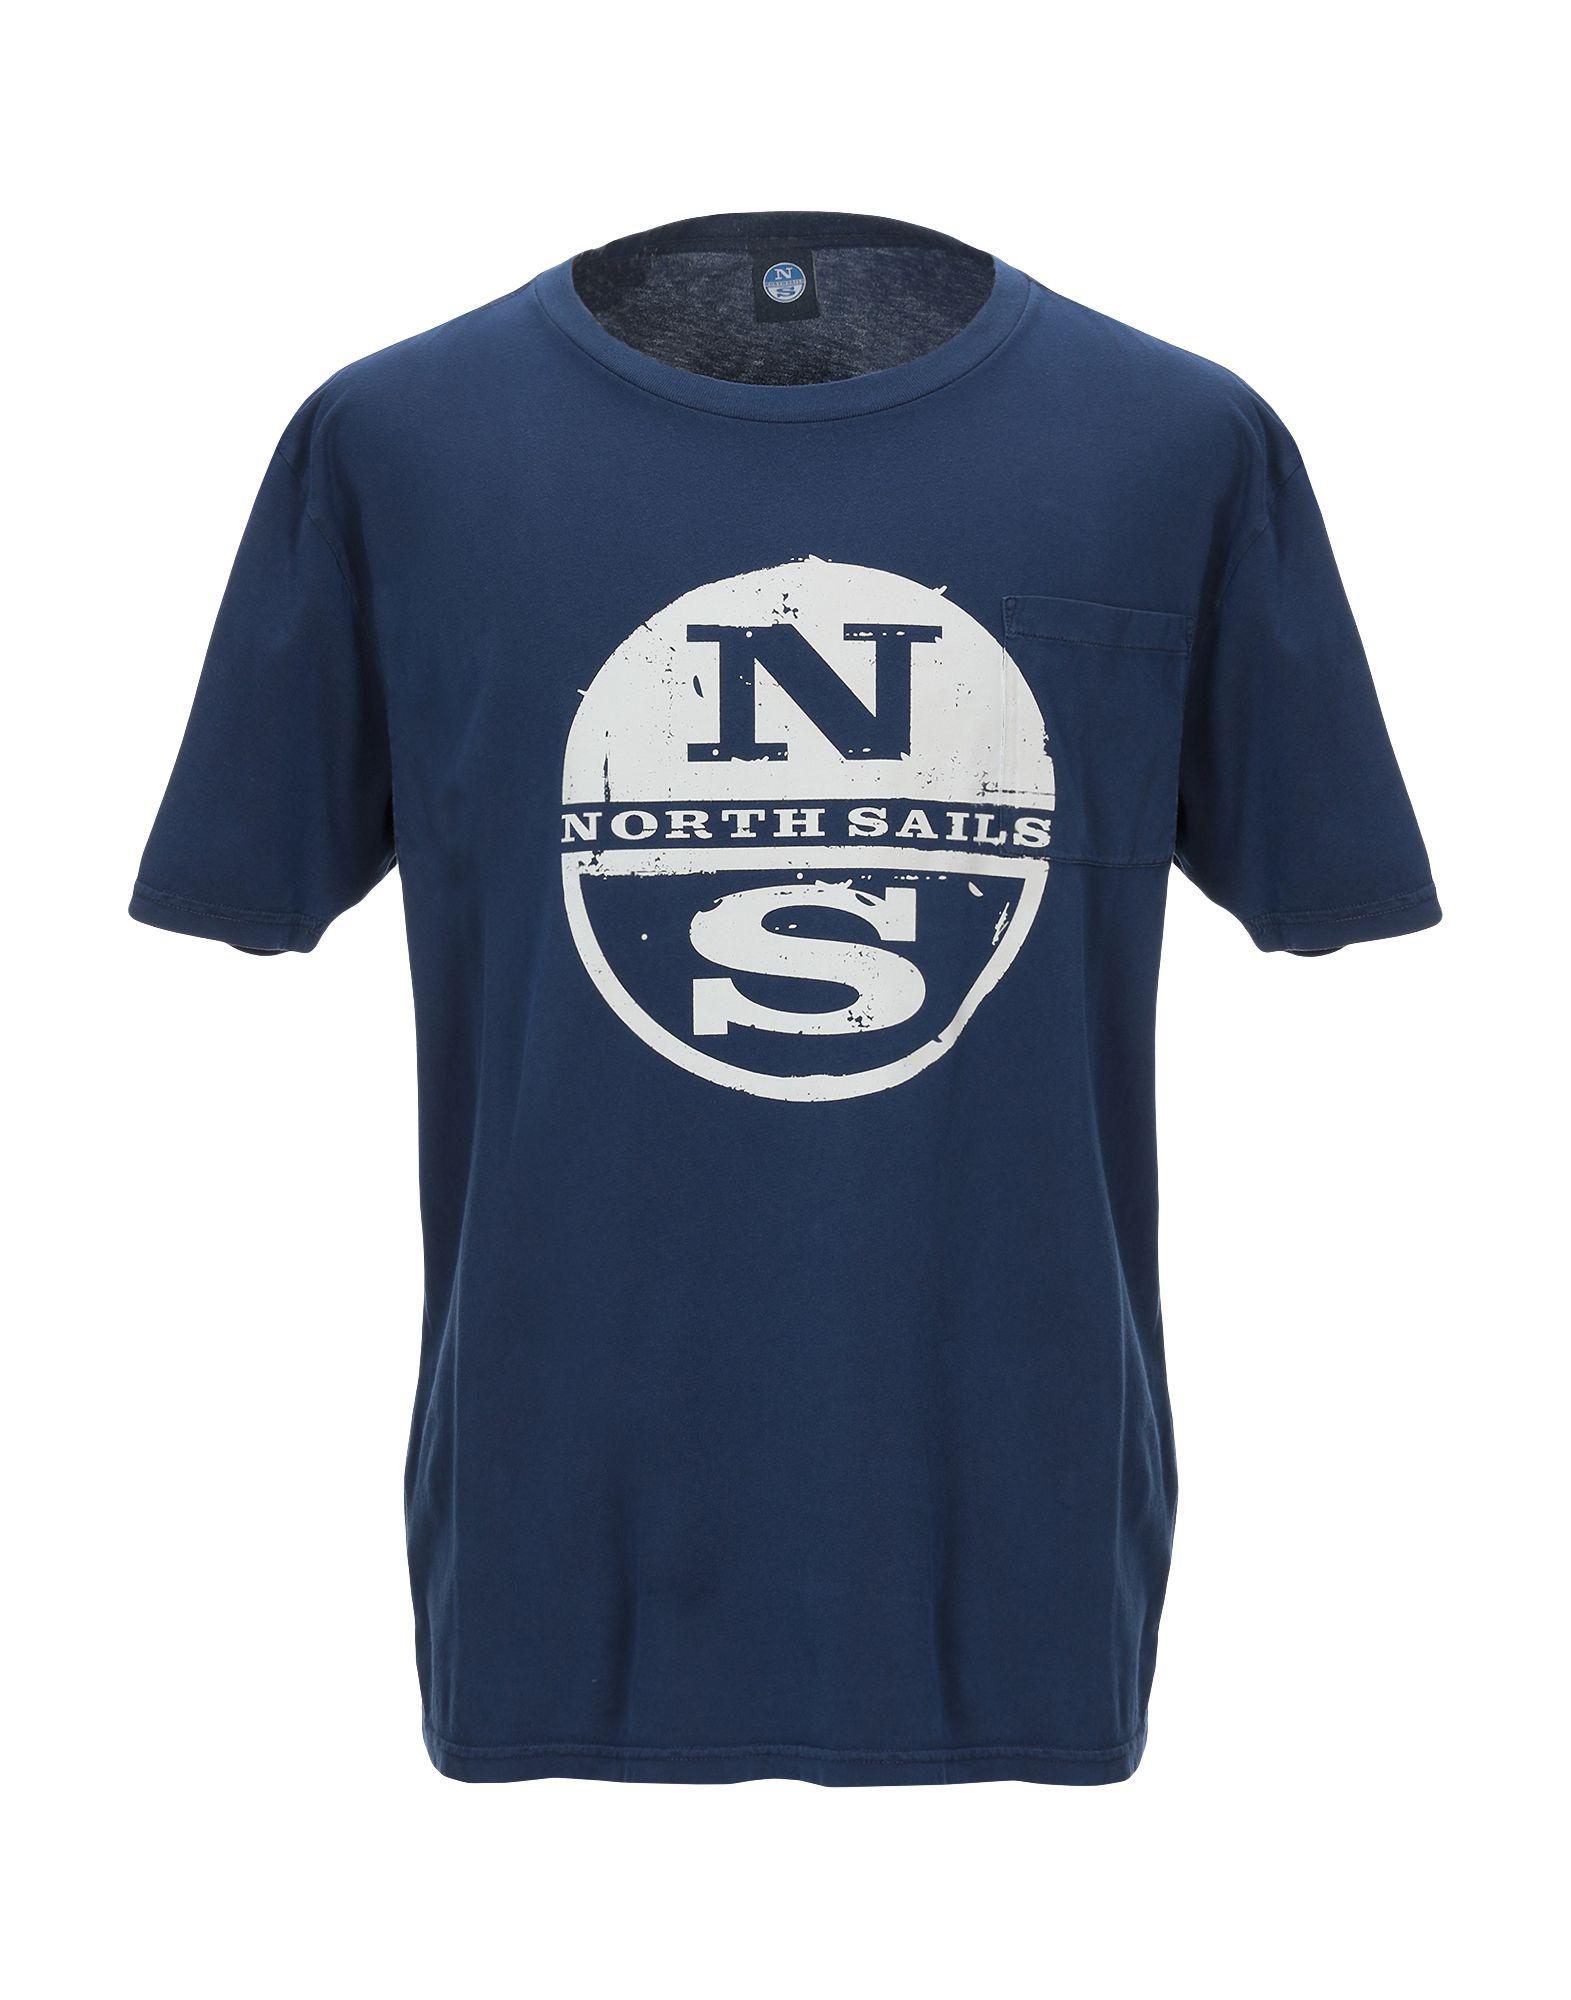 North Sails T-shirt in Blue for Men - Lyst